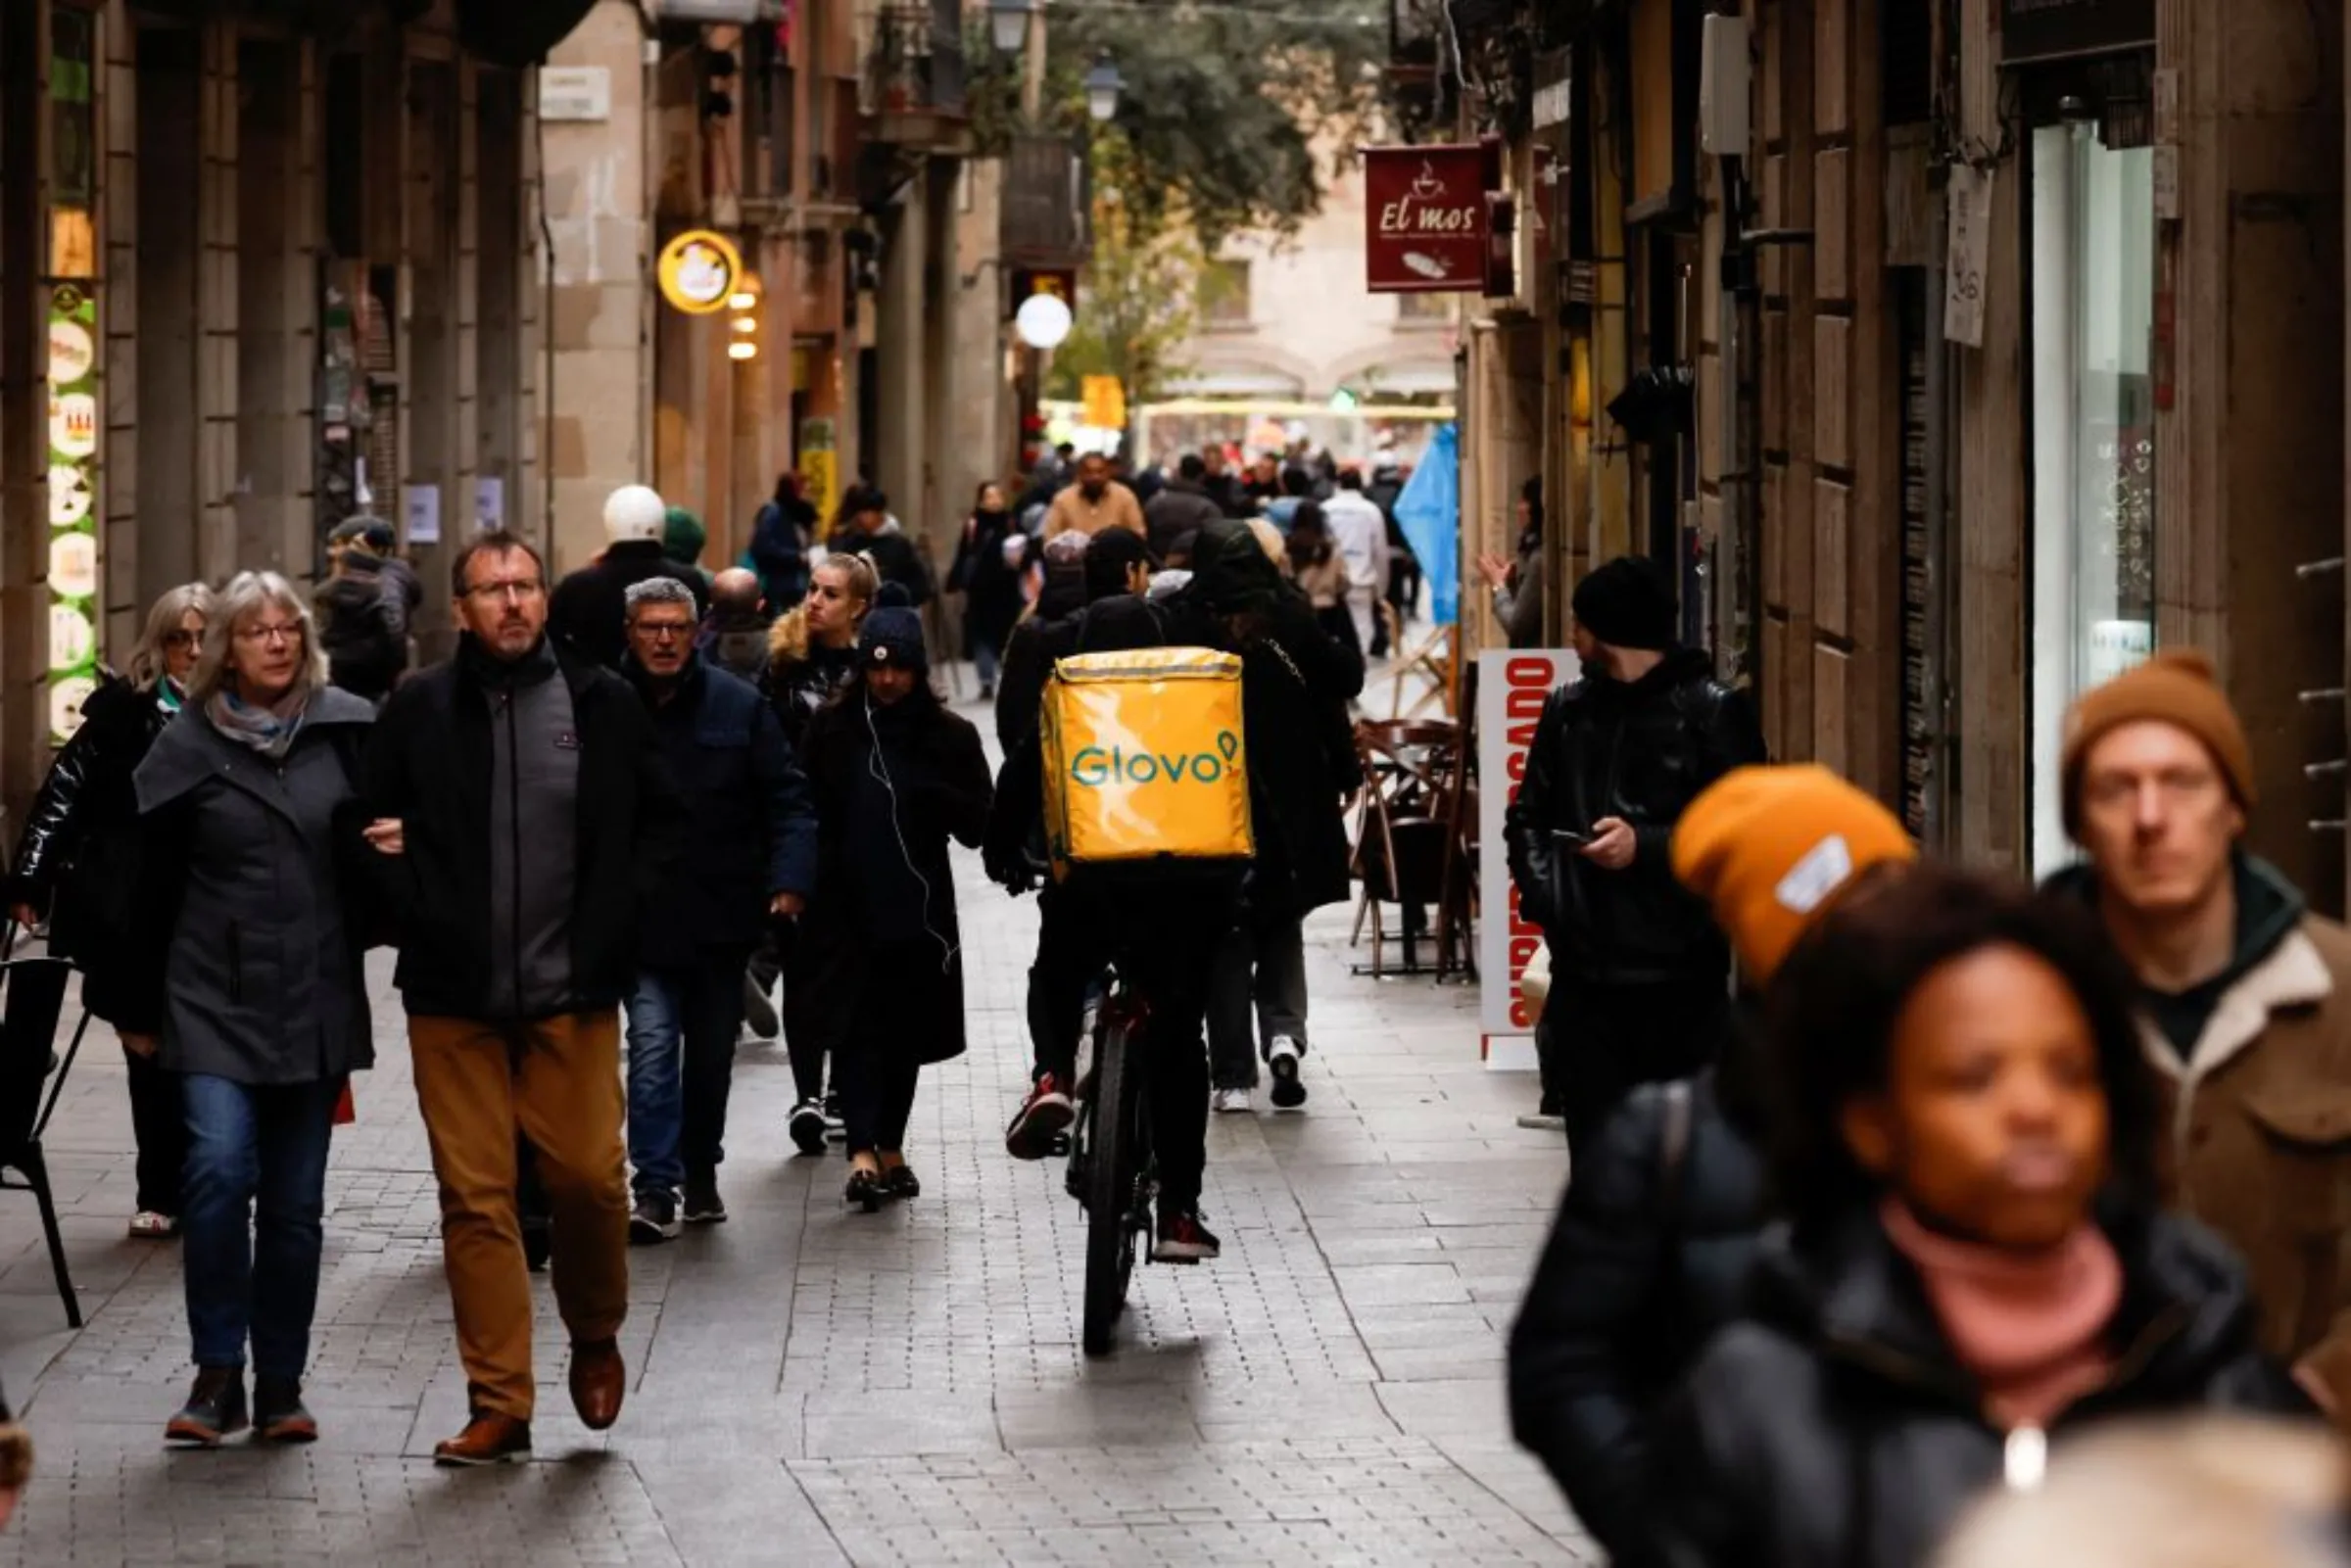 A Glovo delivery rider passes by a pedestrian area in Barcelona, Spain, January 24, 2023. REUTERS/Albert Gea